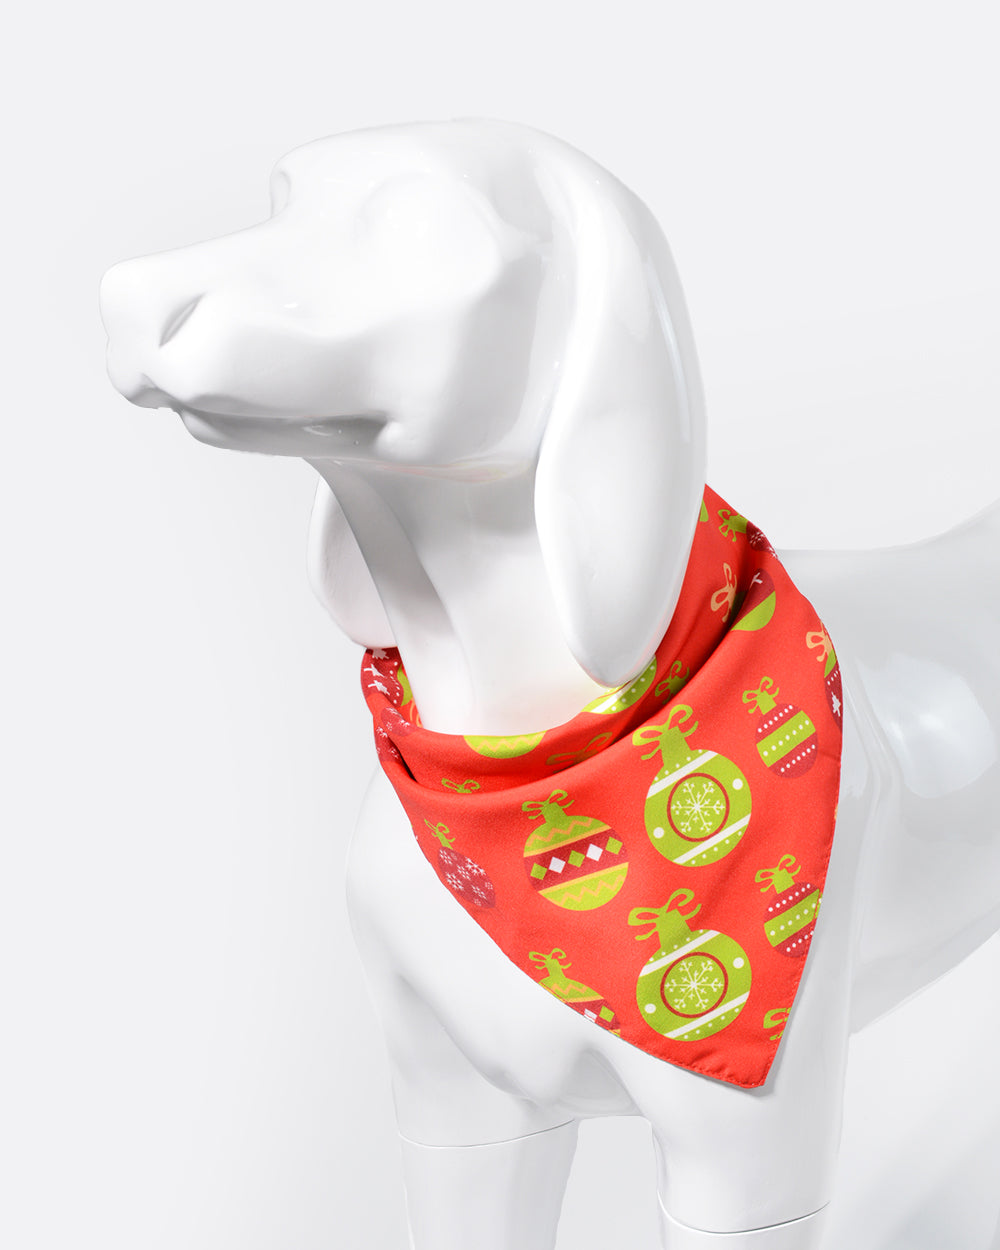 This Christmas reversible dog bandana suit is for Medium or Large dogs, such as Golden retrievers, Labradors, Samoyed, Border Collies, etc. It can be adjusted to fit different dogs.